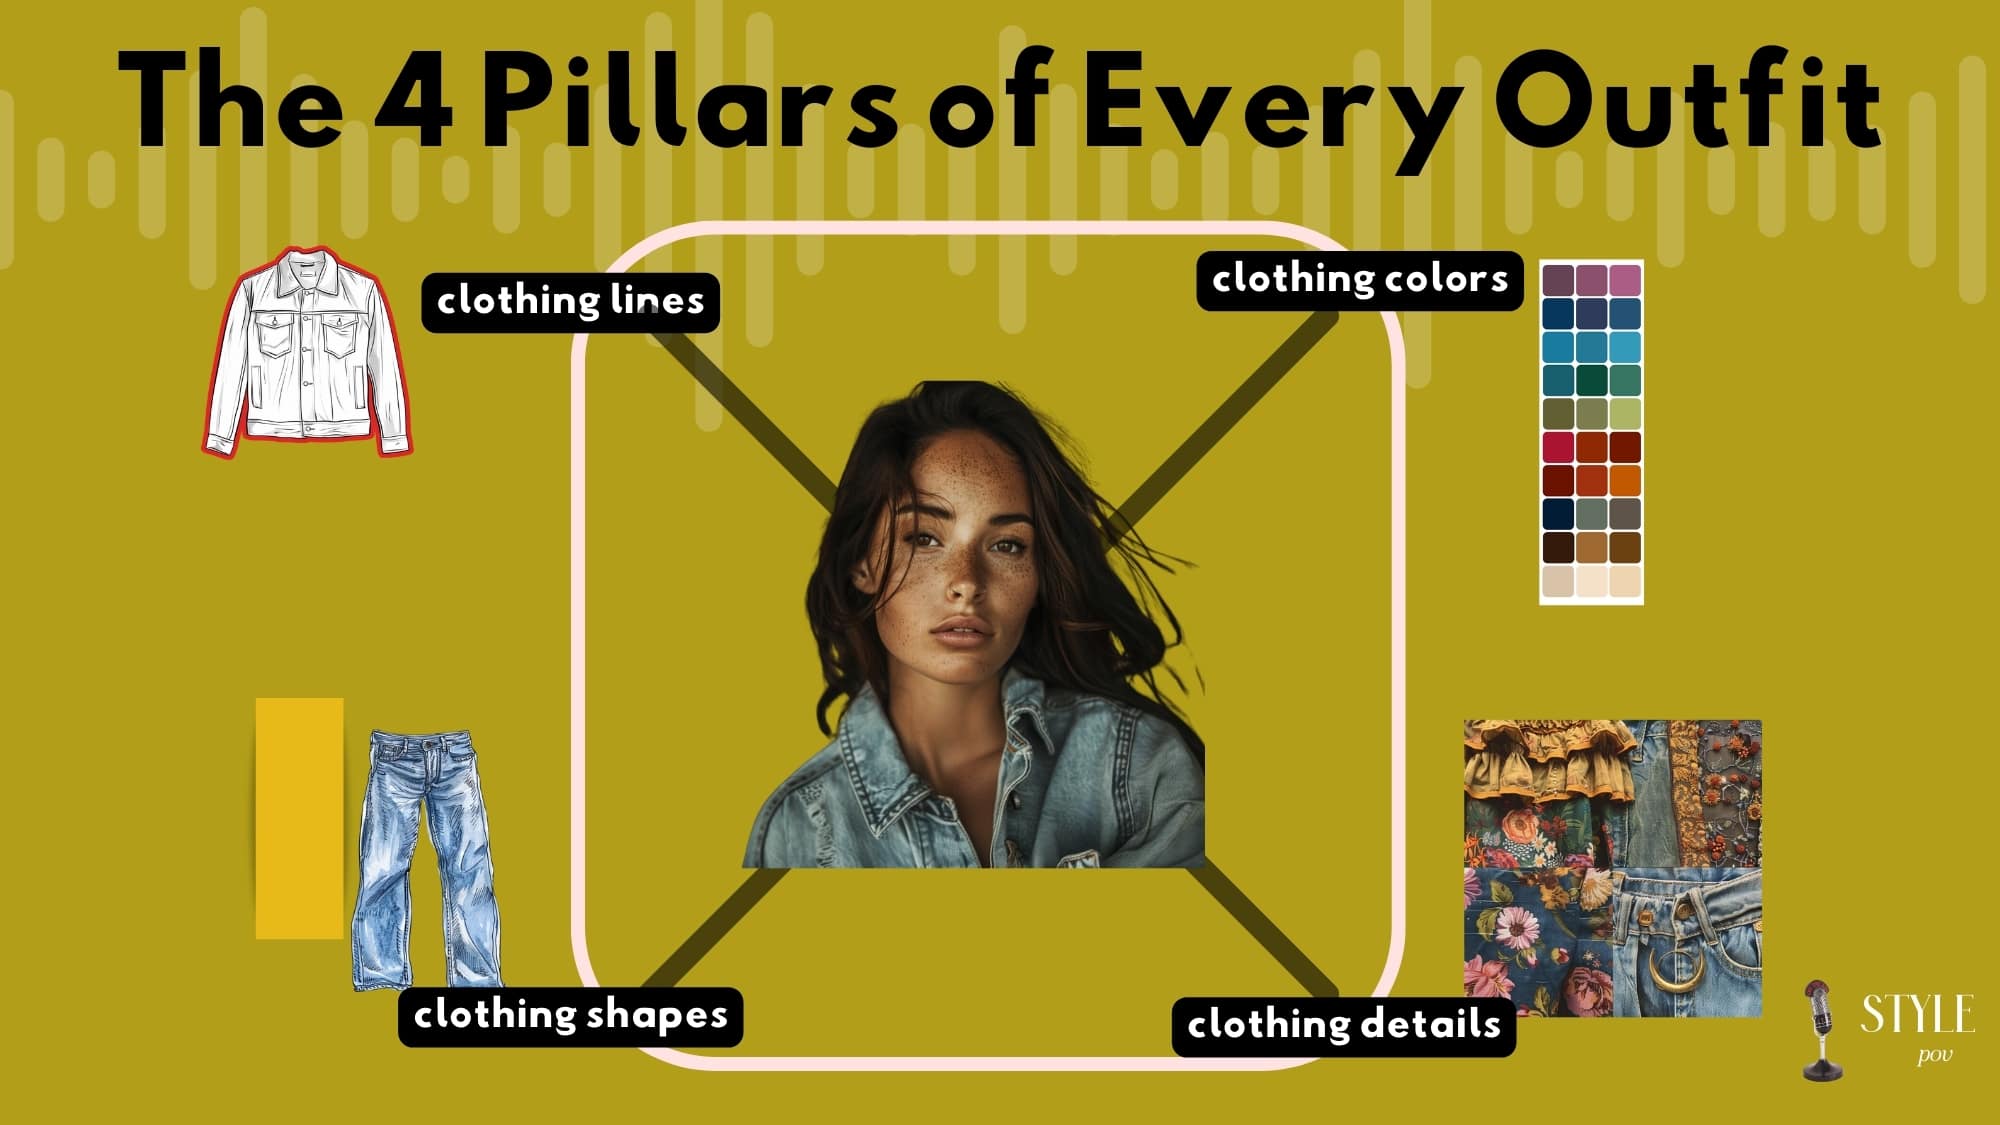 the four pillars of every outfit with a diagram leading to clothing details, clothing colors, clothing lines, and clothing shapes